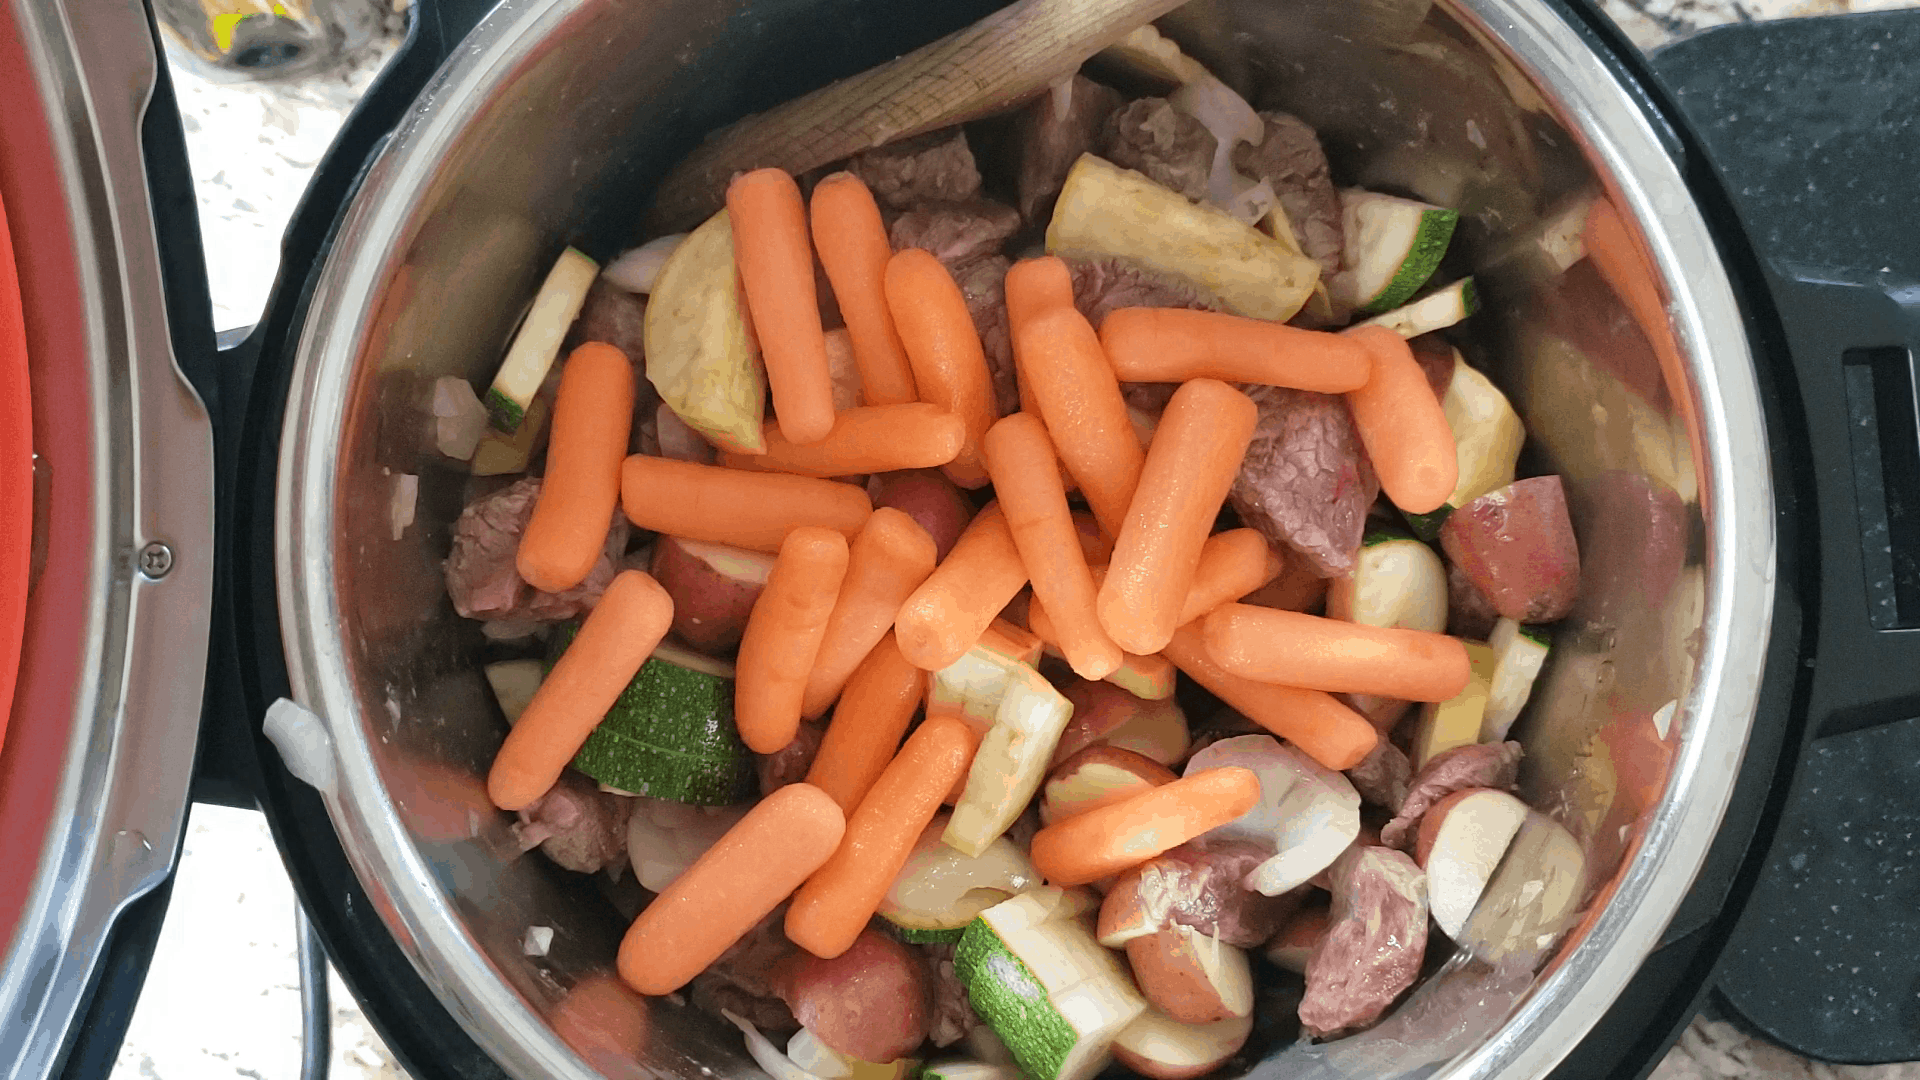 Potatoes, Carrots and Zucchini in Instant Pot